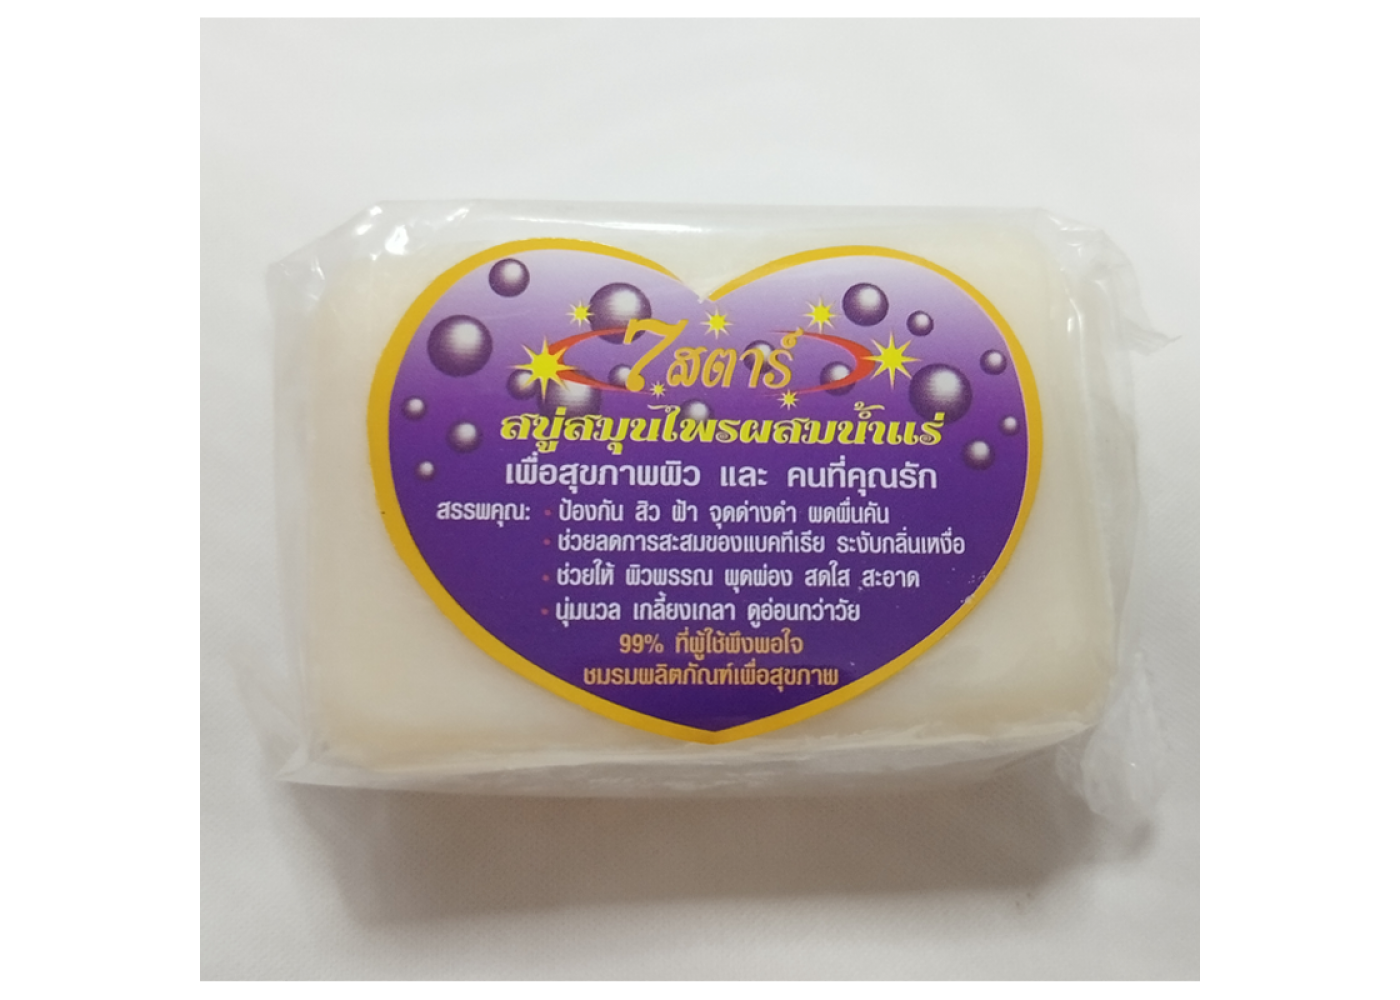 Herbal soap mixed with mineral water. Big size 130 micrograms. Buy 500 baht. Free shipping.